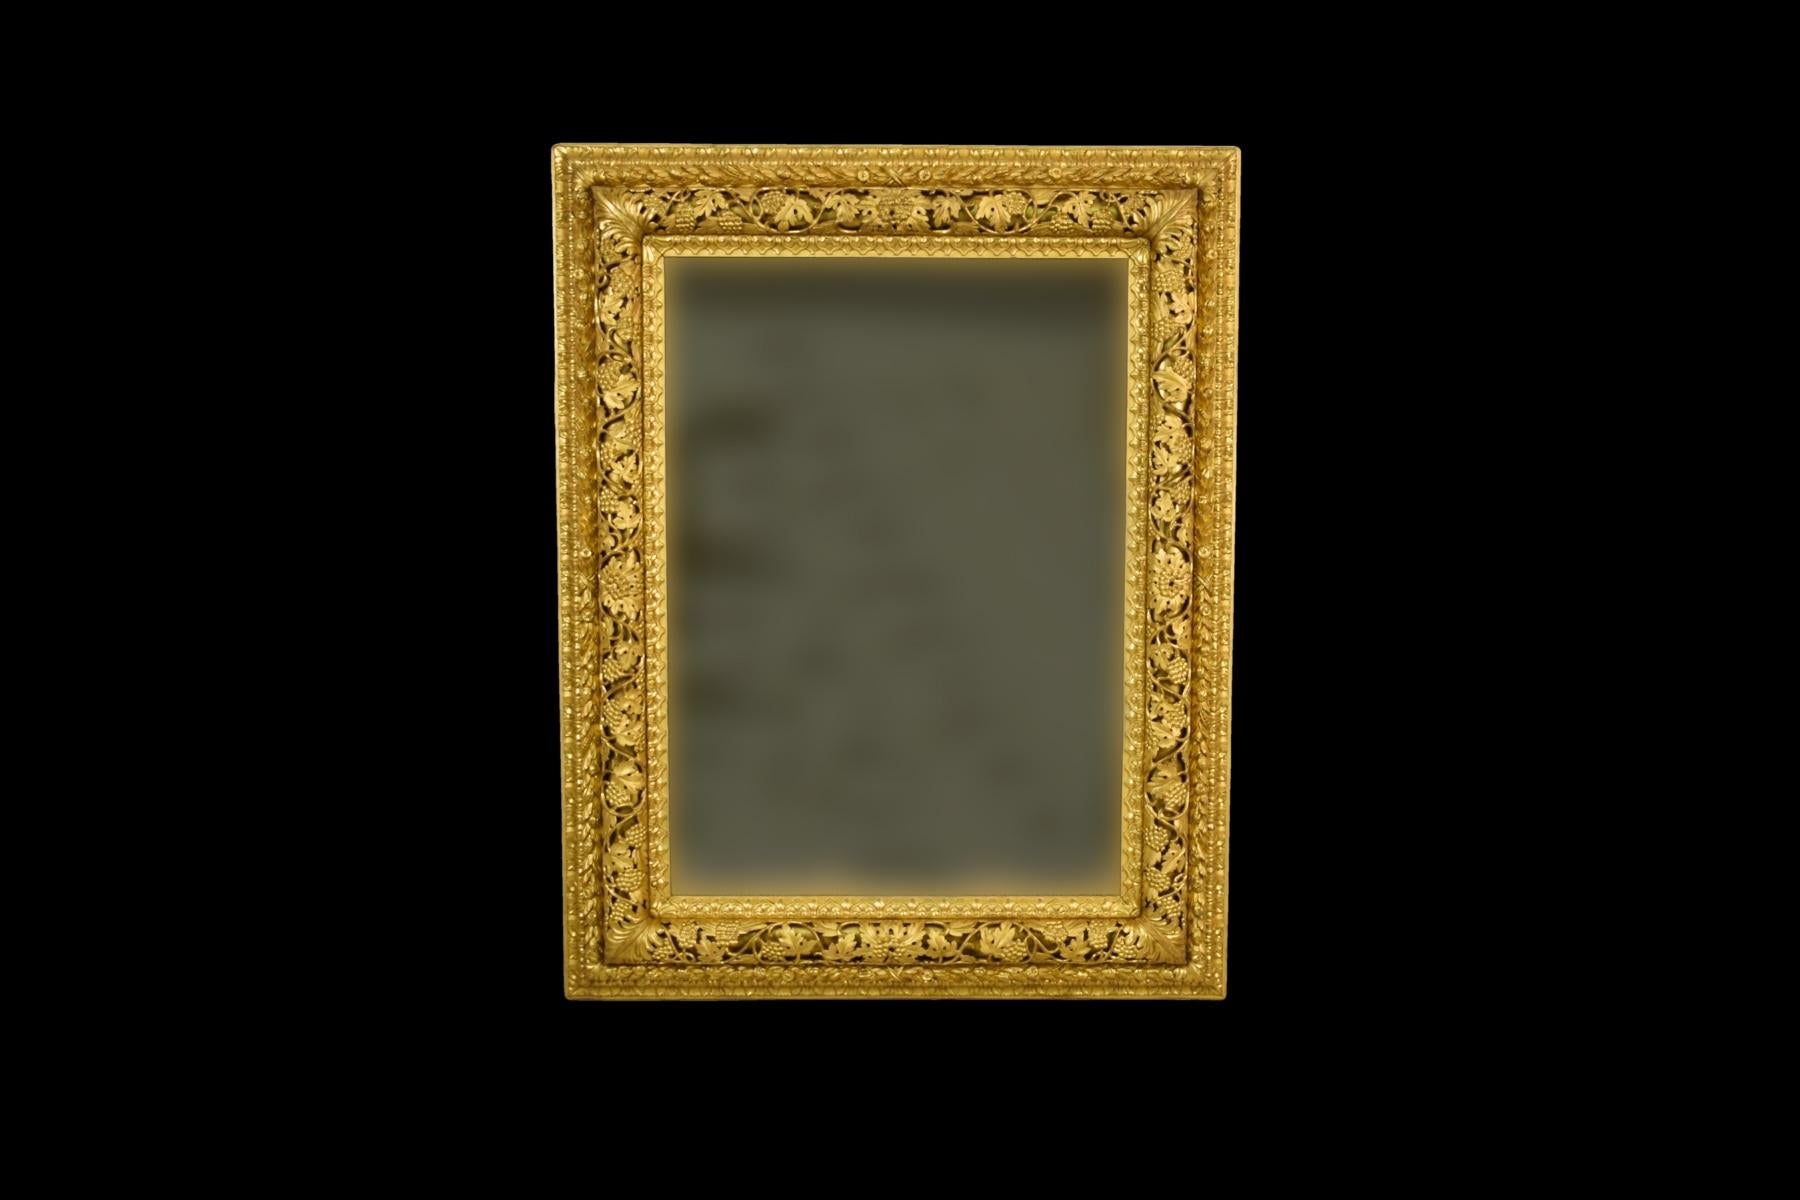 This beautiful rectangular mercury mirror in carved and gilded wood frame was made in the early 19th century in Venetian area of Italy. The richly carved frame is characterized by a shape called 